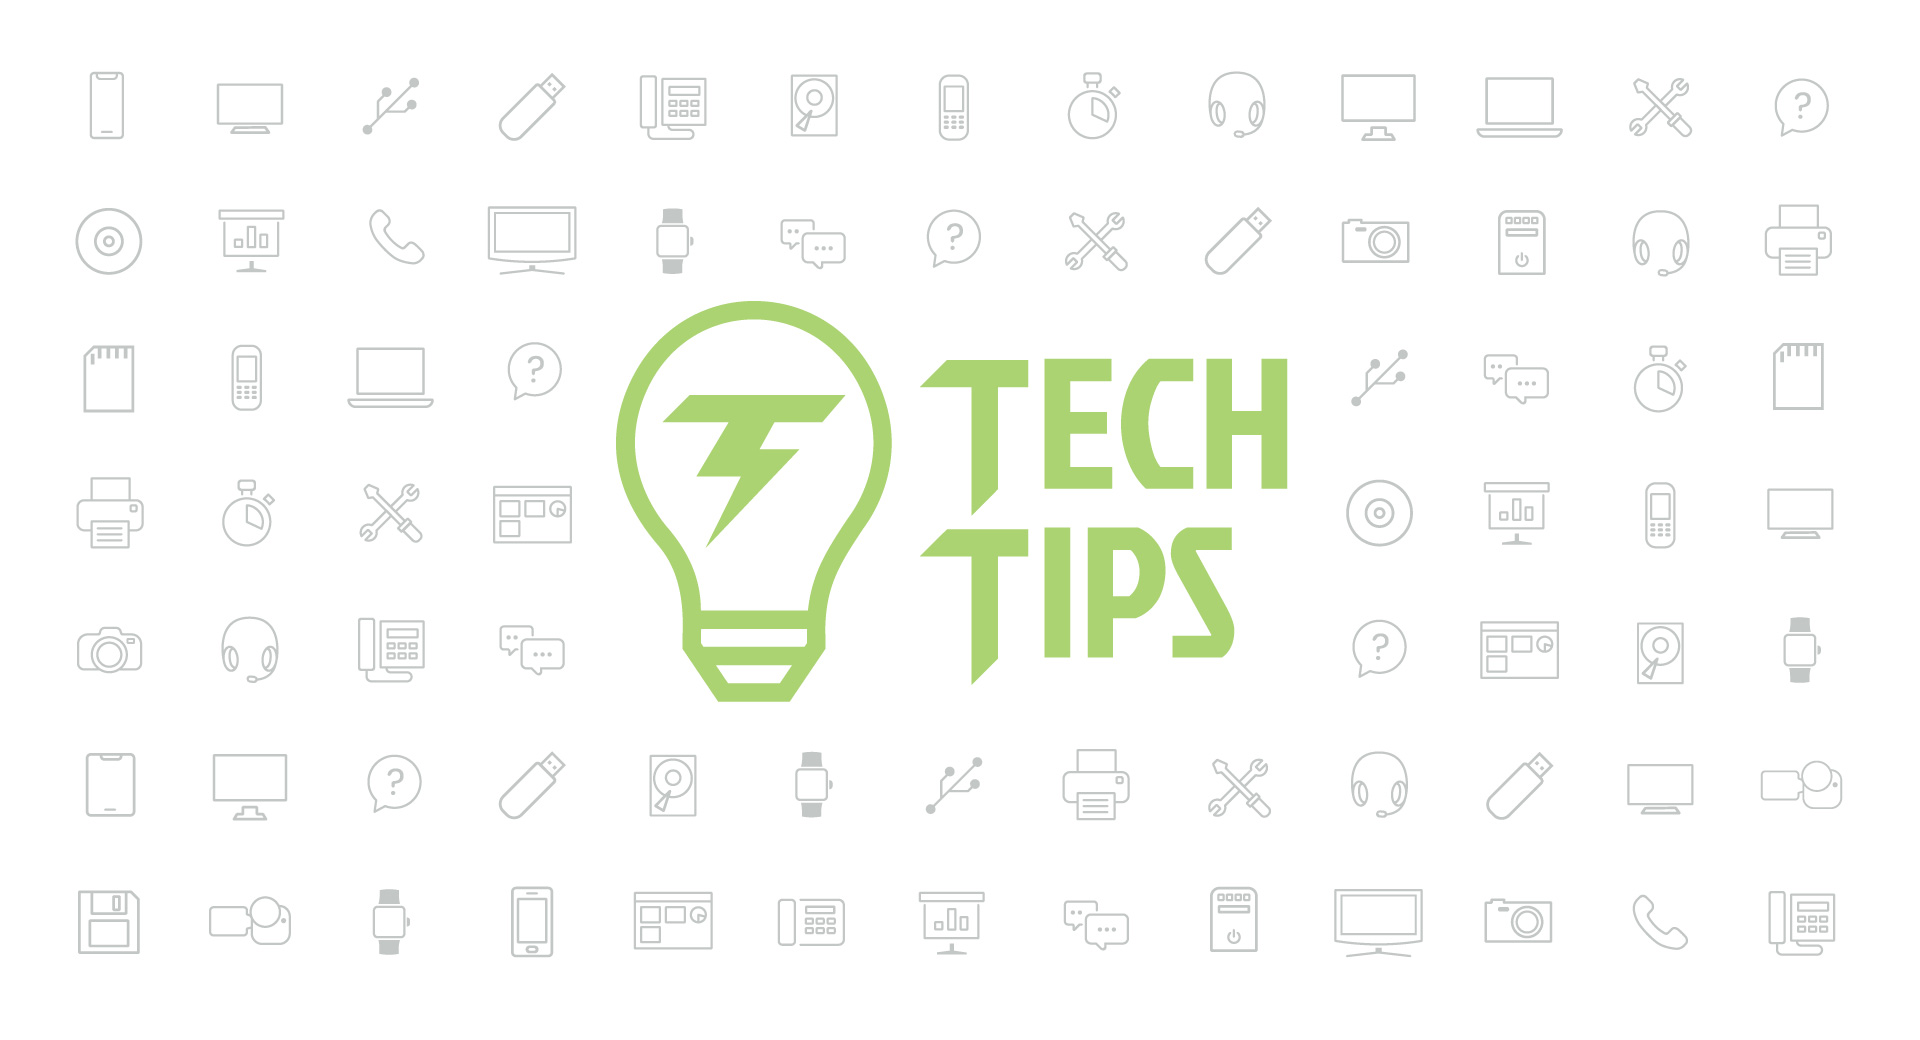 Technology Tips: March 2021 Edition